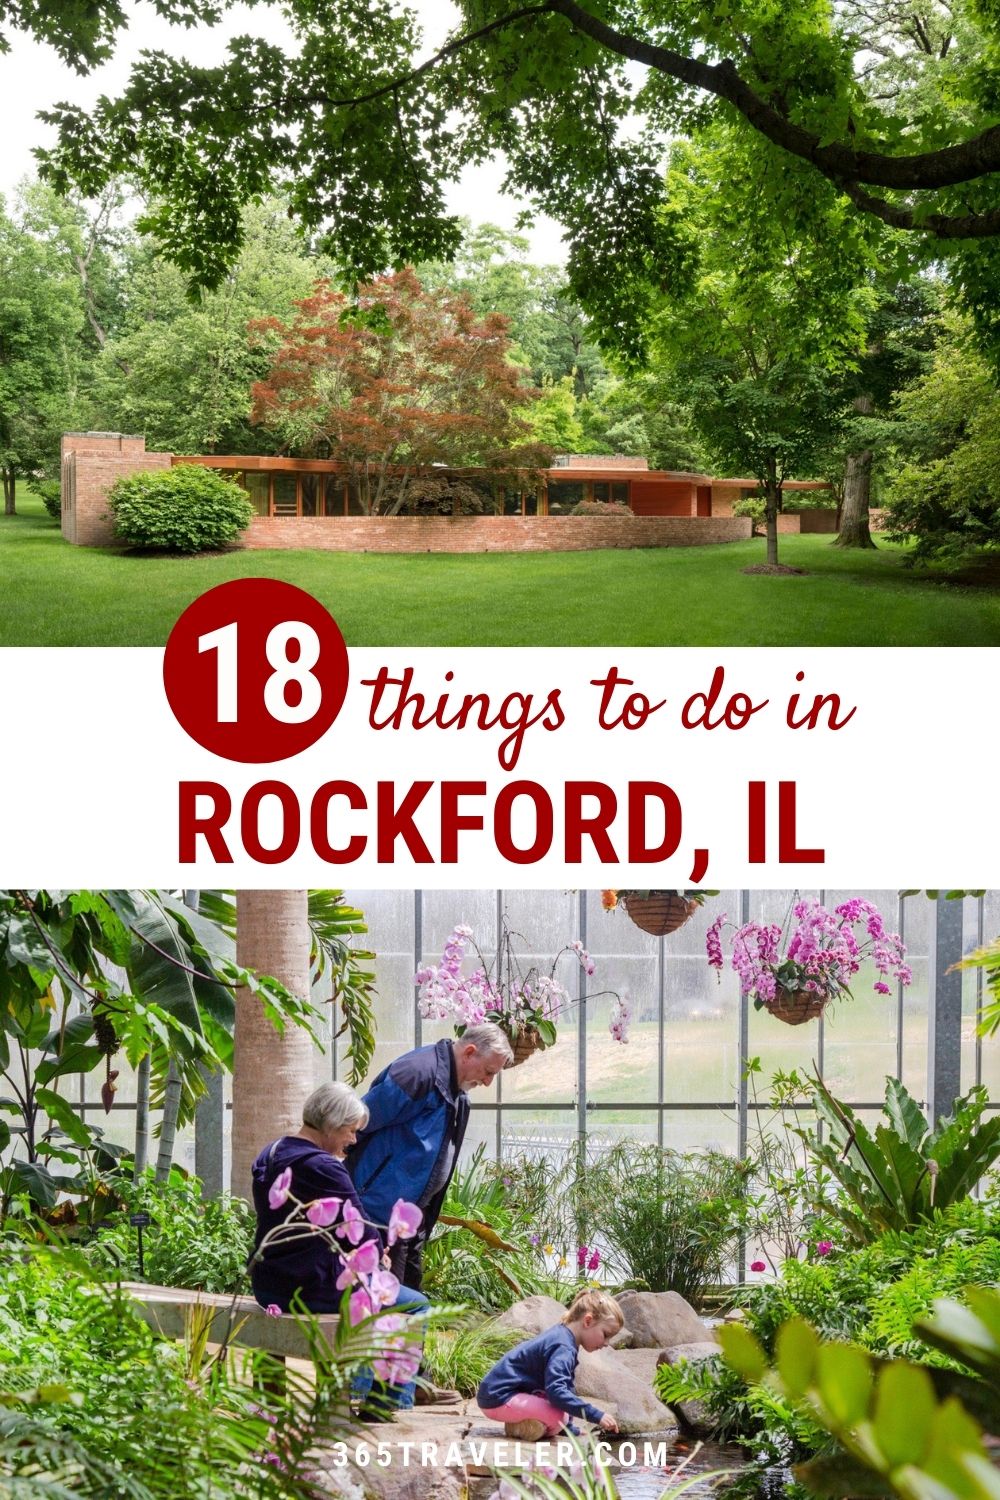 18 BEST THINGS TO DO IN ROCKFORD IL YOU'LL LOVE